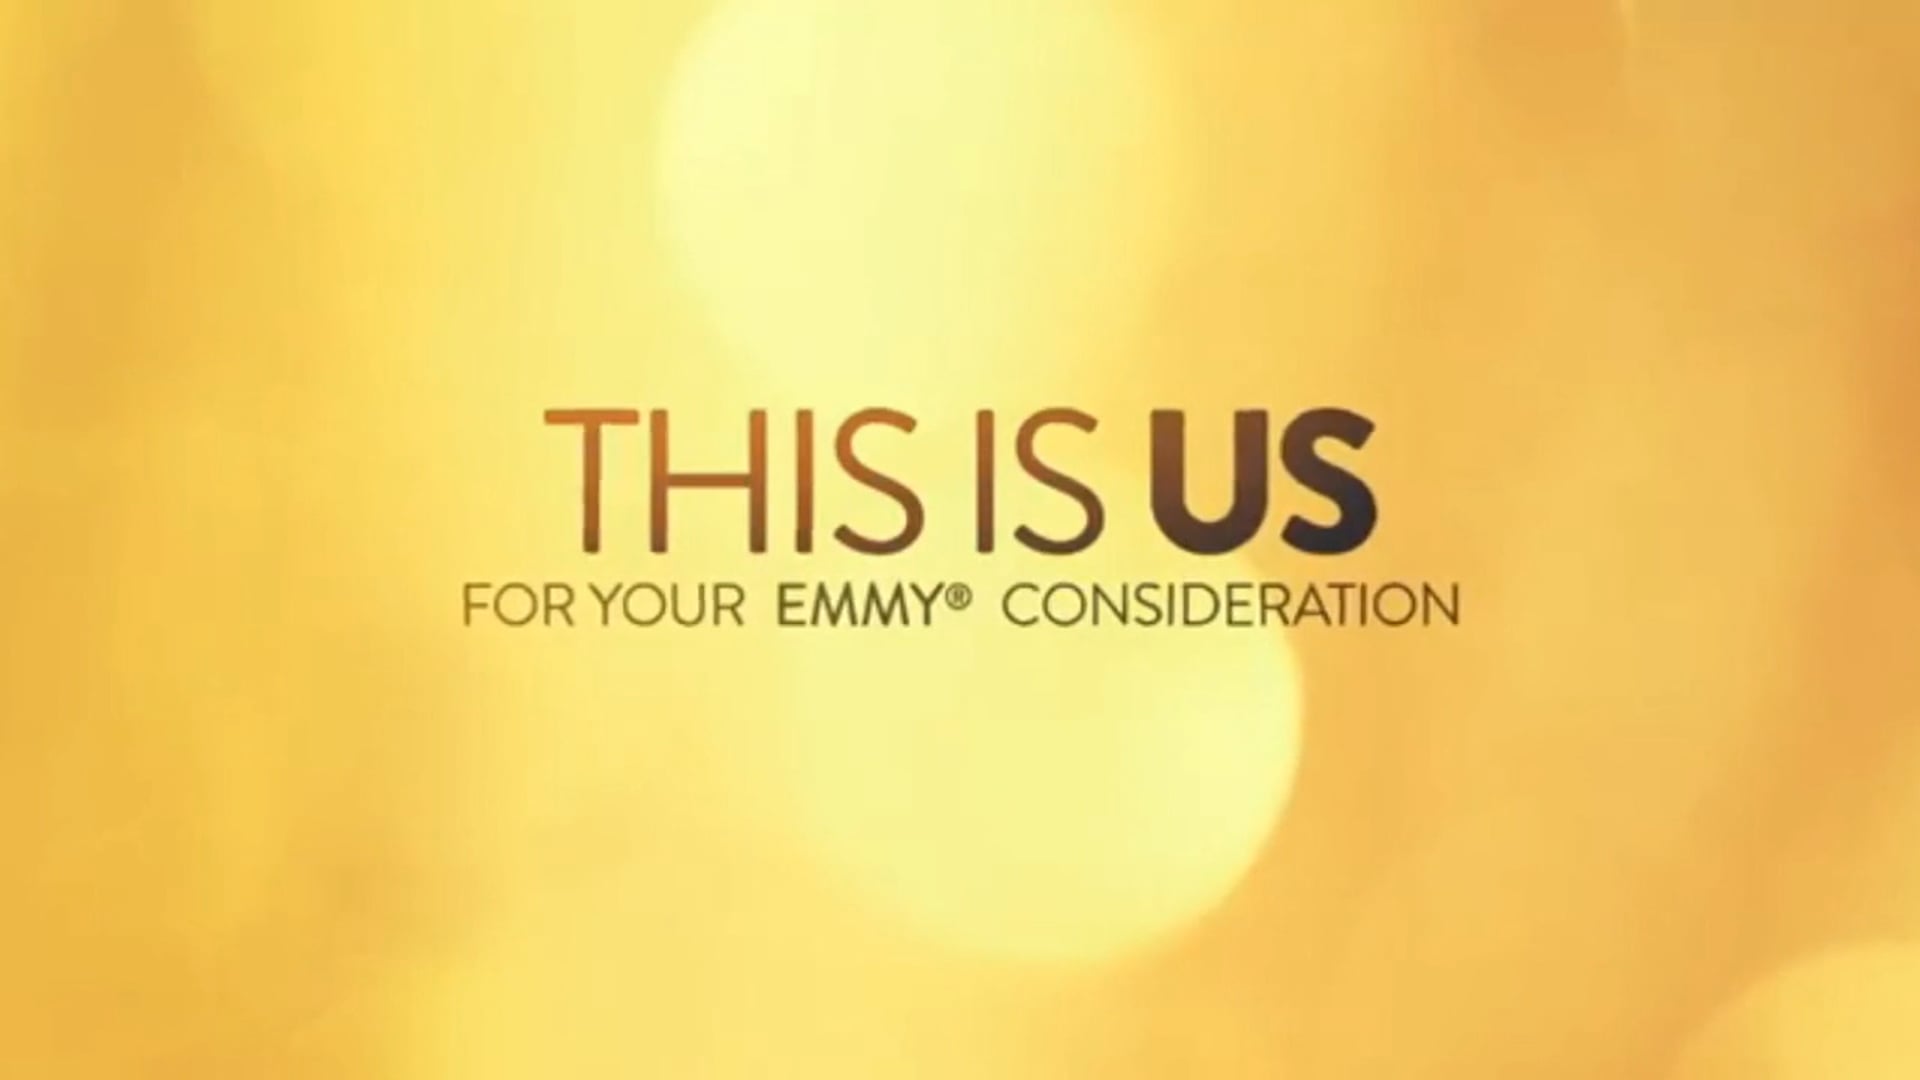 This Is Us: For Your Emmy Consideration